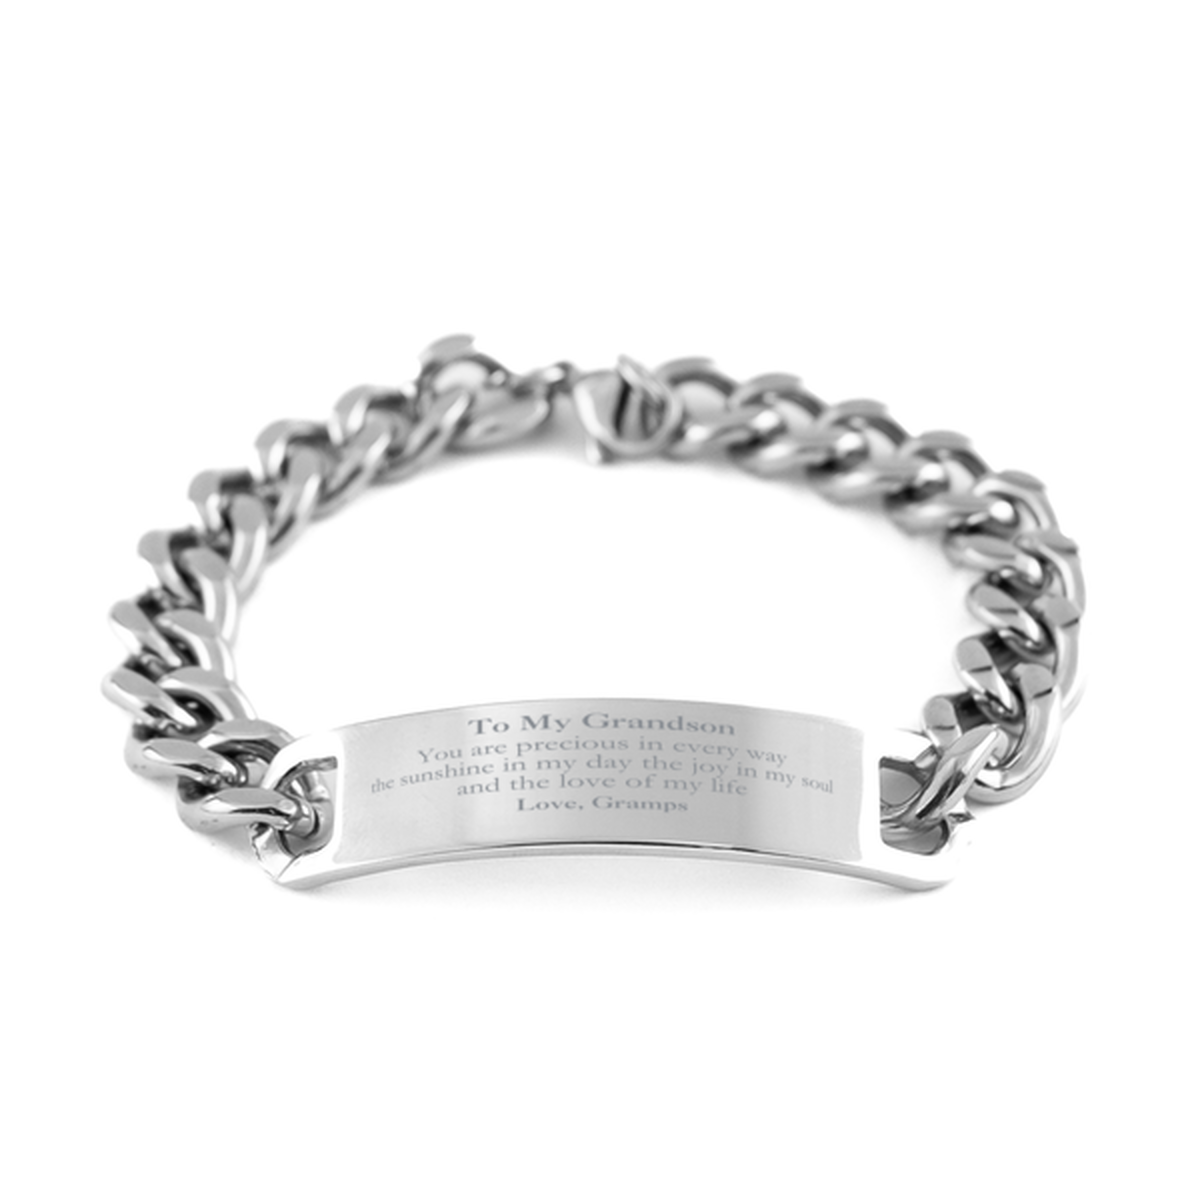 Graduation Gifts for Grandson Cuban Chain Stainless Steel Bracelet Present from Gramps, Christmas Grandson Birthday Gifts Grandson You are precious in every way the sunshine in my day. Love, Gramps